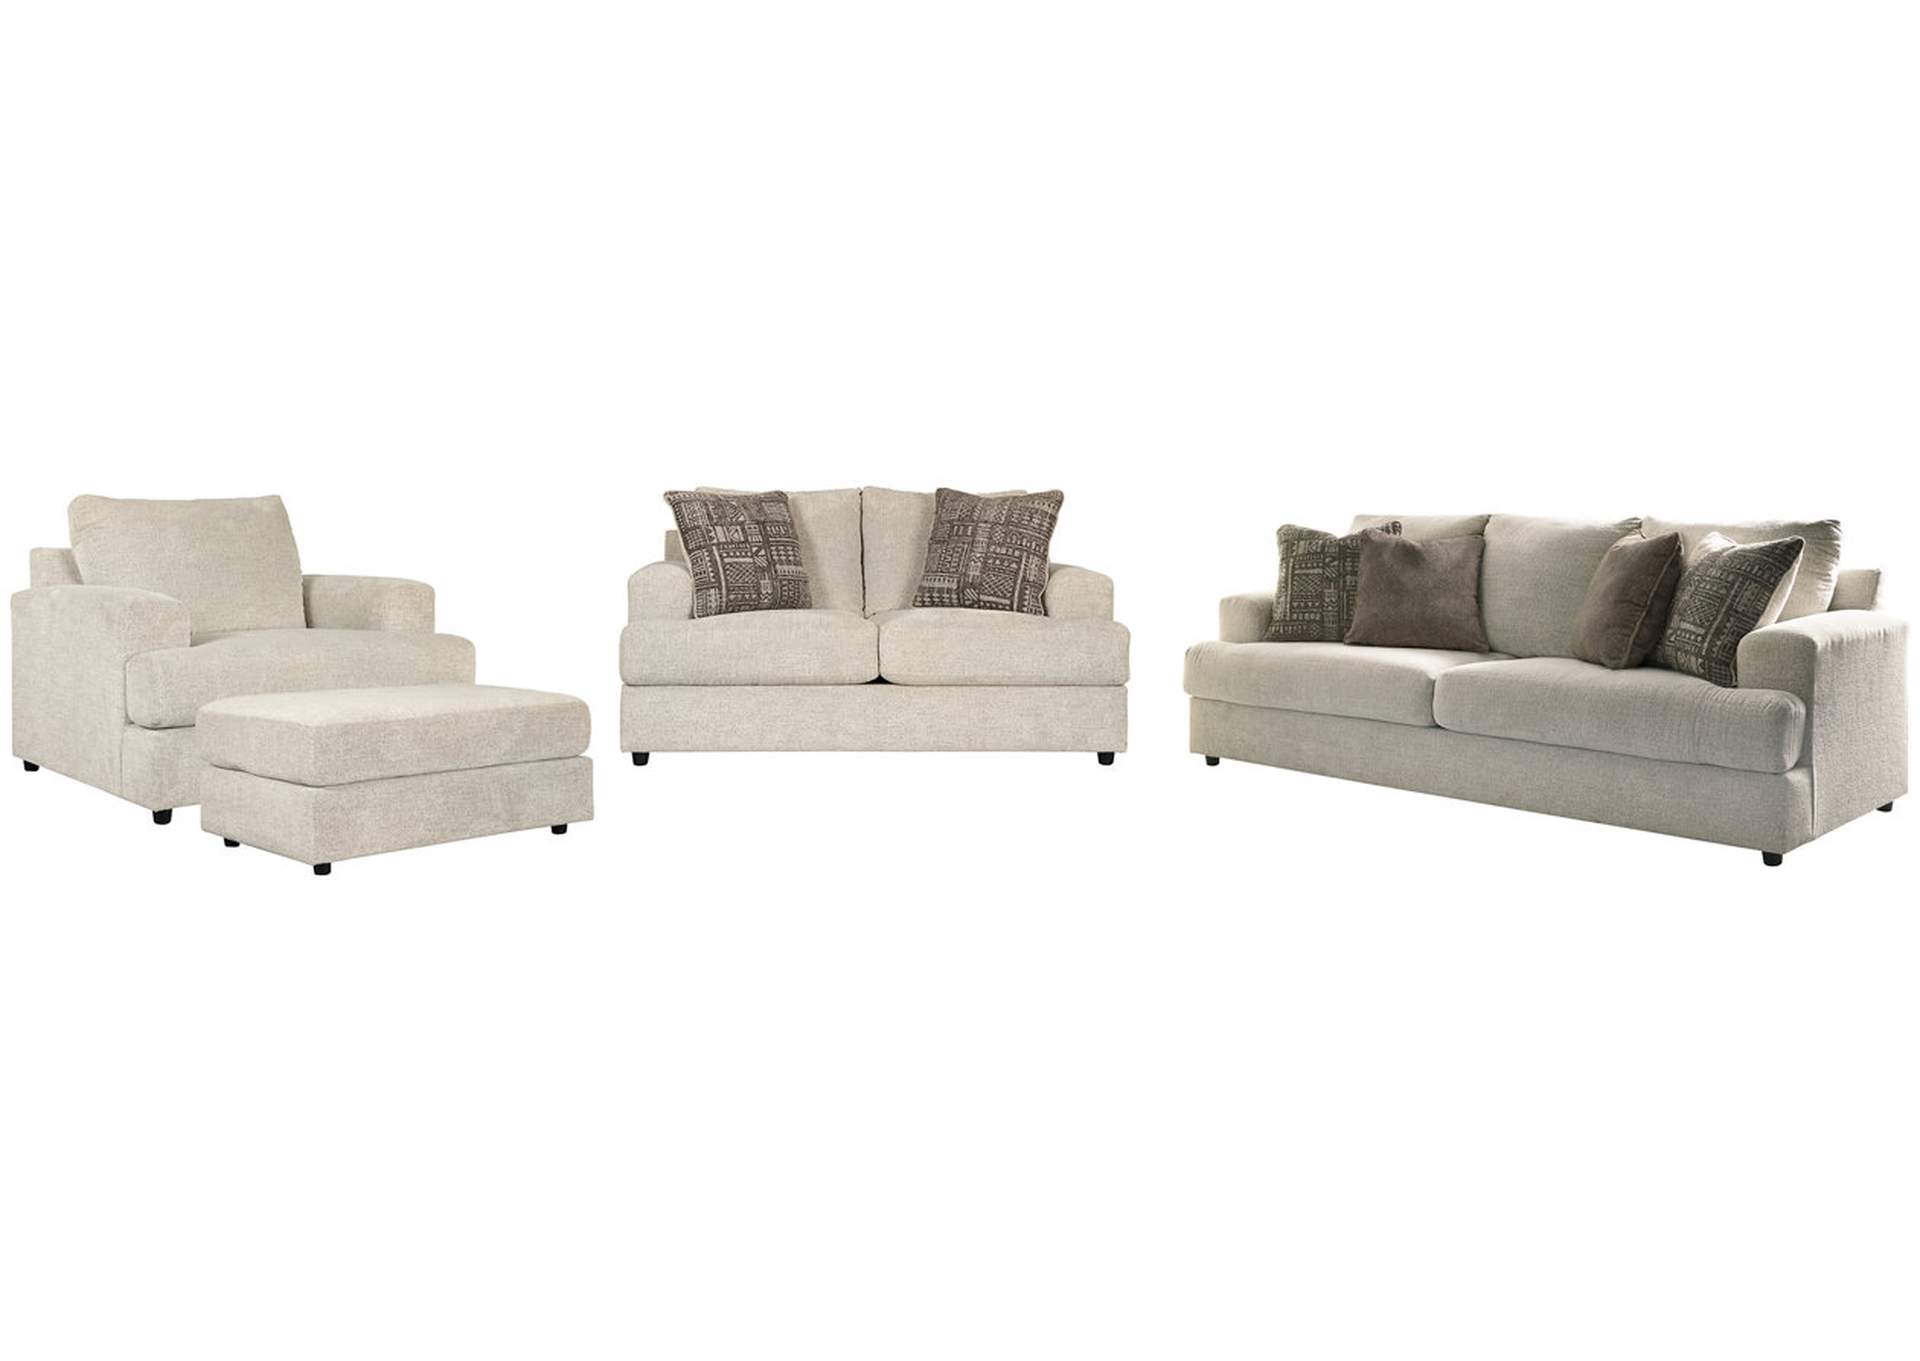 Soletren Sofa, Loveseat, Chair and Ottoman,Signature Design By Ashley